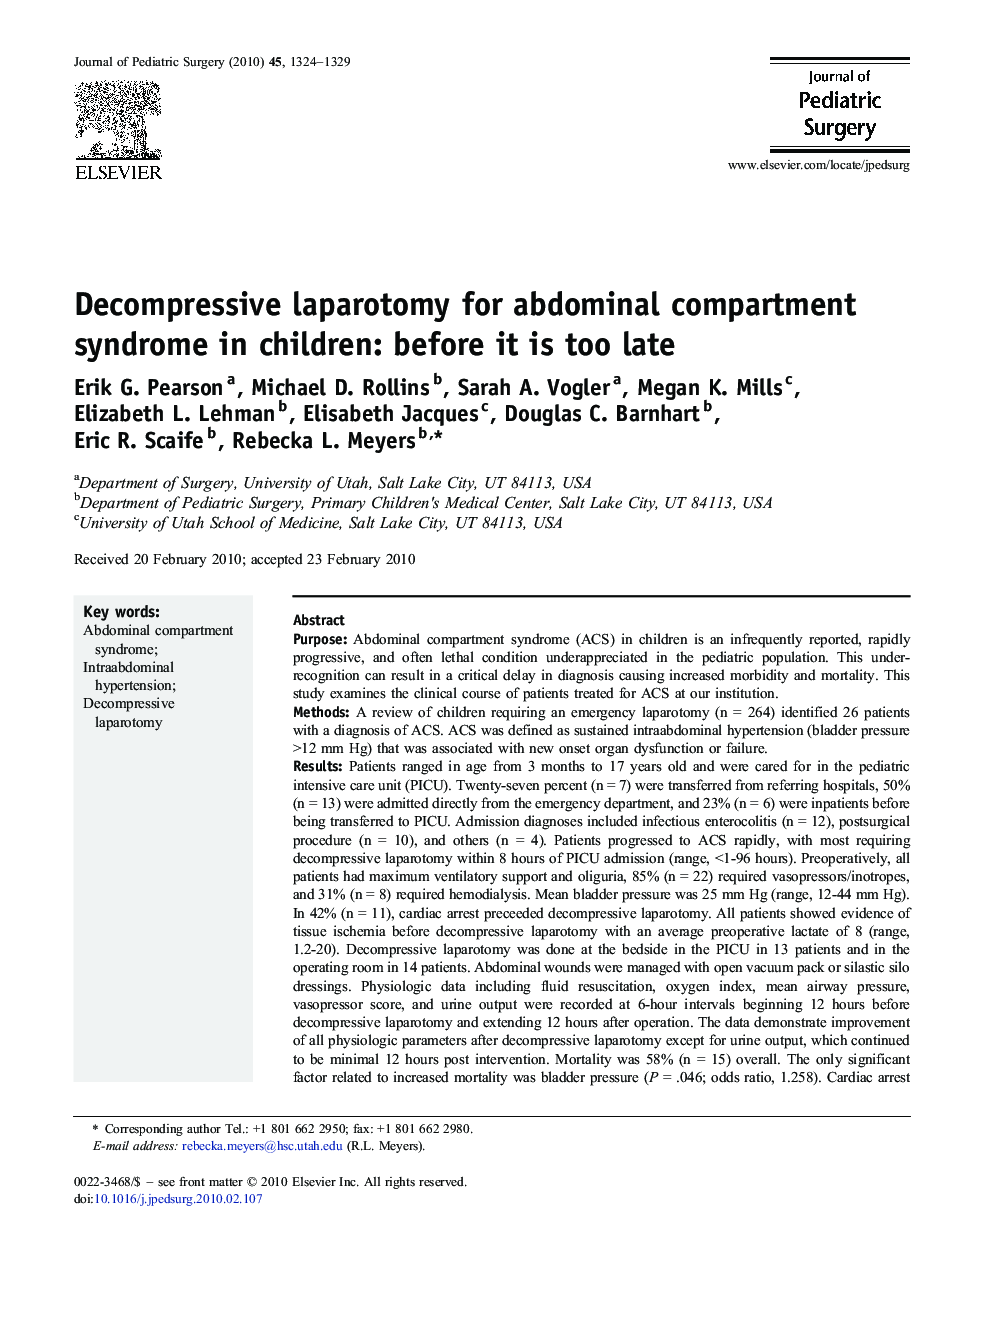 Decompressive laparotomy for abdominal compartment syndrome in children: before it is too late